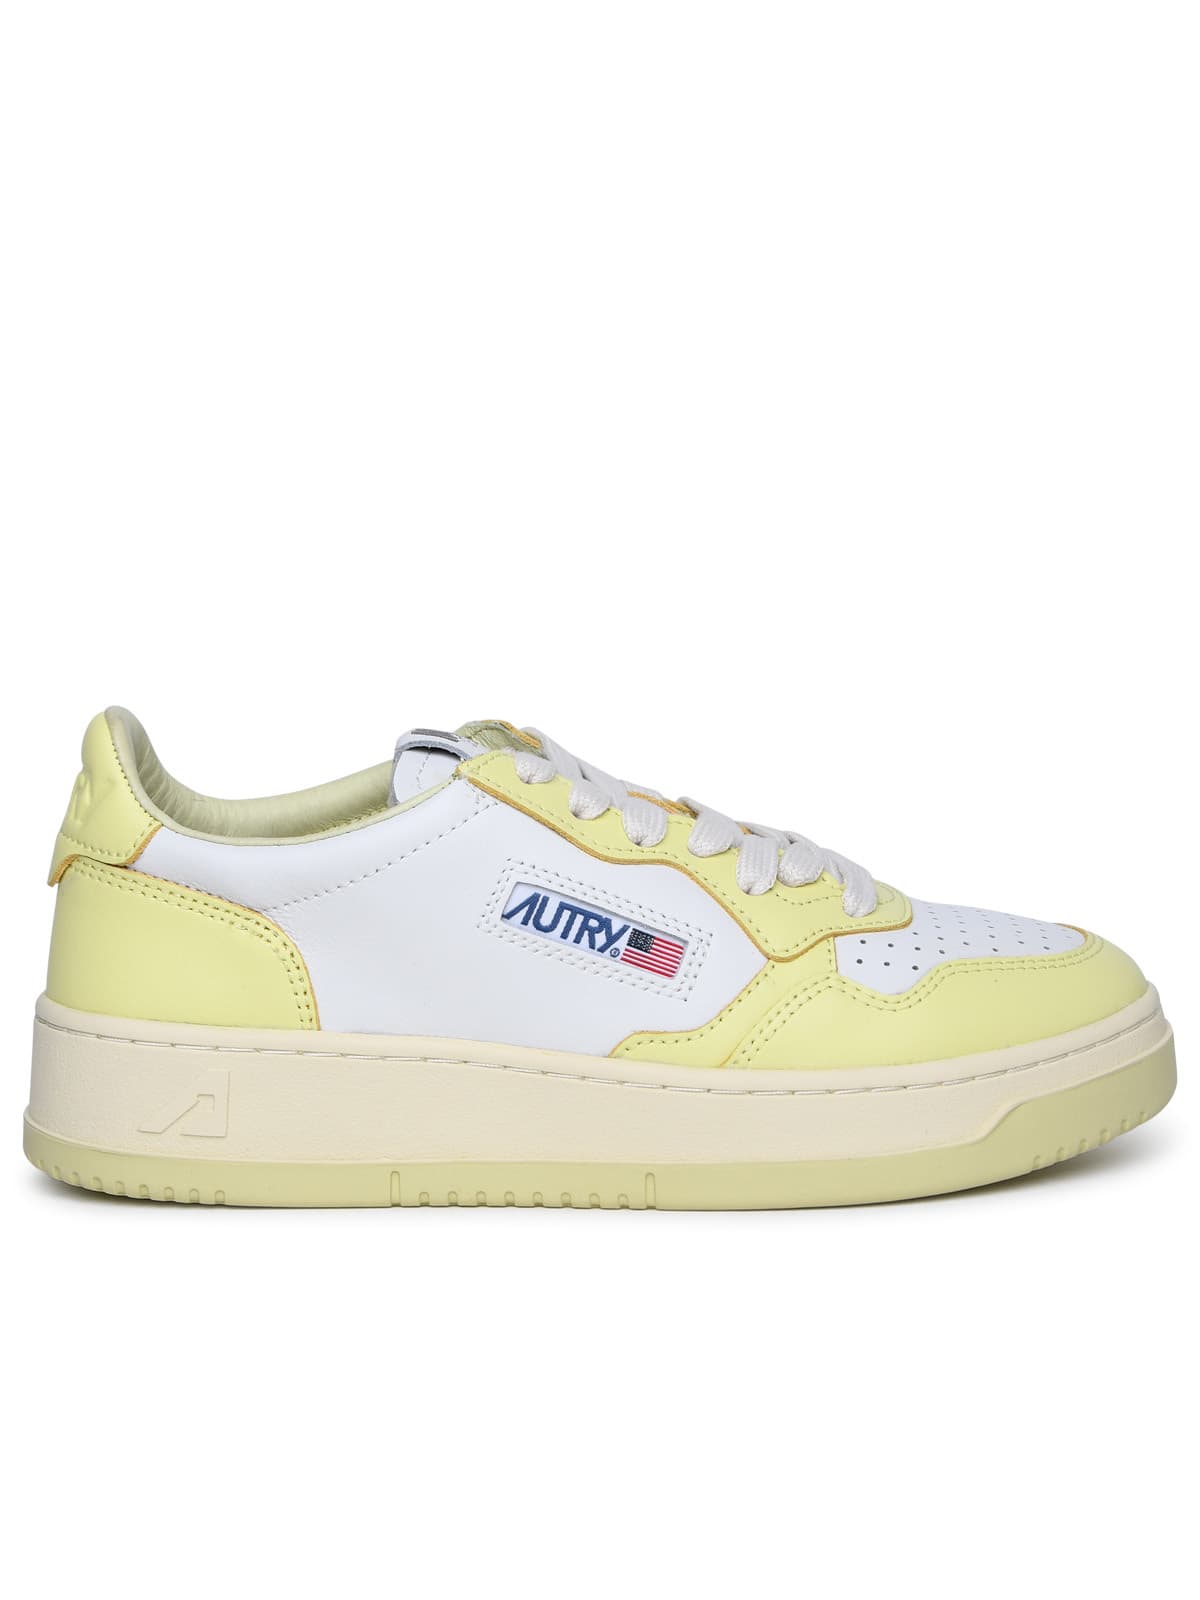 Shop Autry Medalist Yellow Leather Sneakers